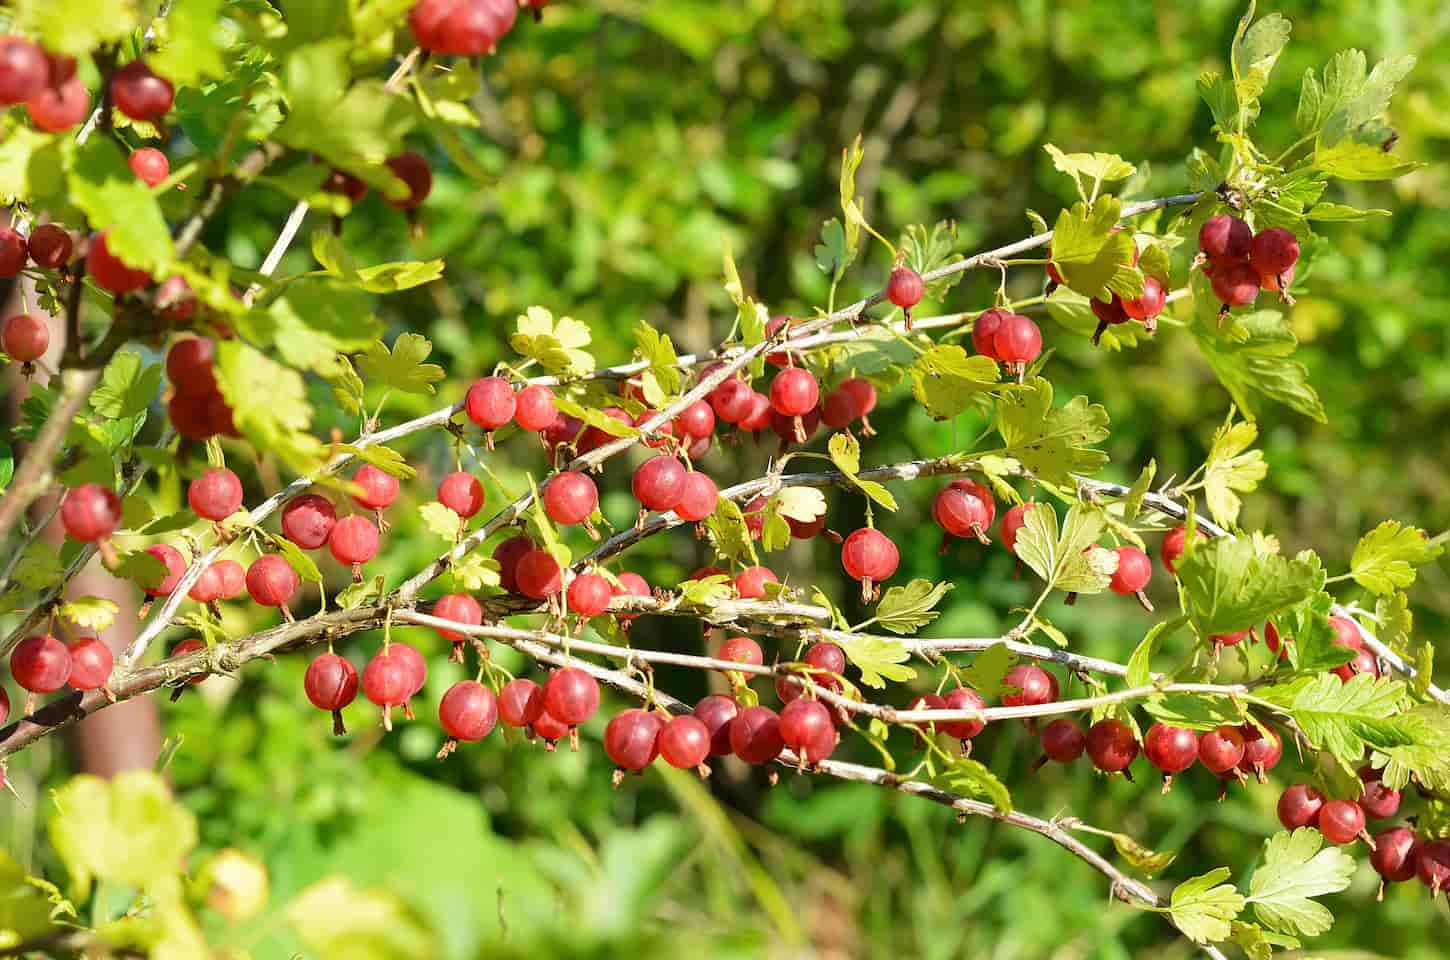 An image of red gooseberries on branches in the garden.